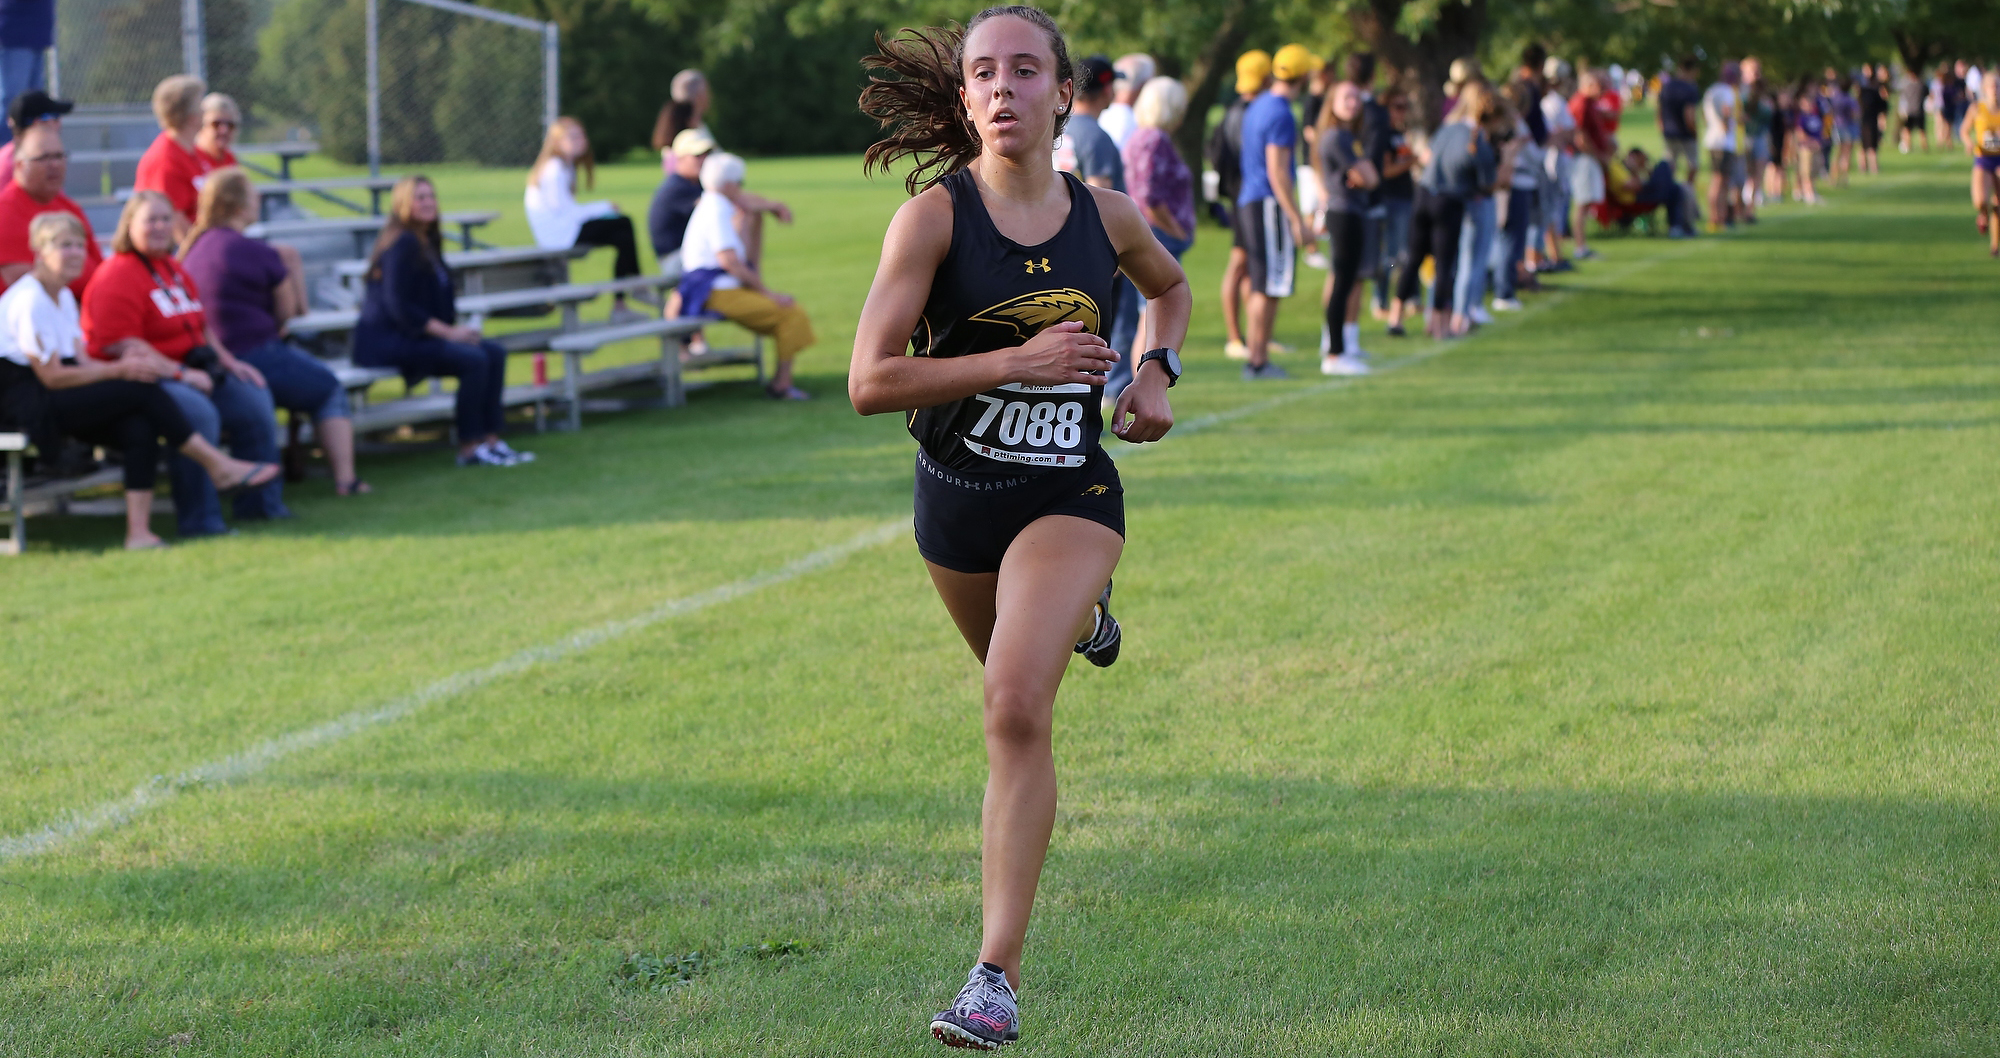 Alexandria Demco took 29th place among the 346 runners at the Blugold Invitational.